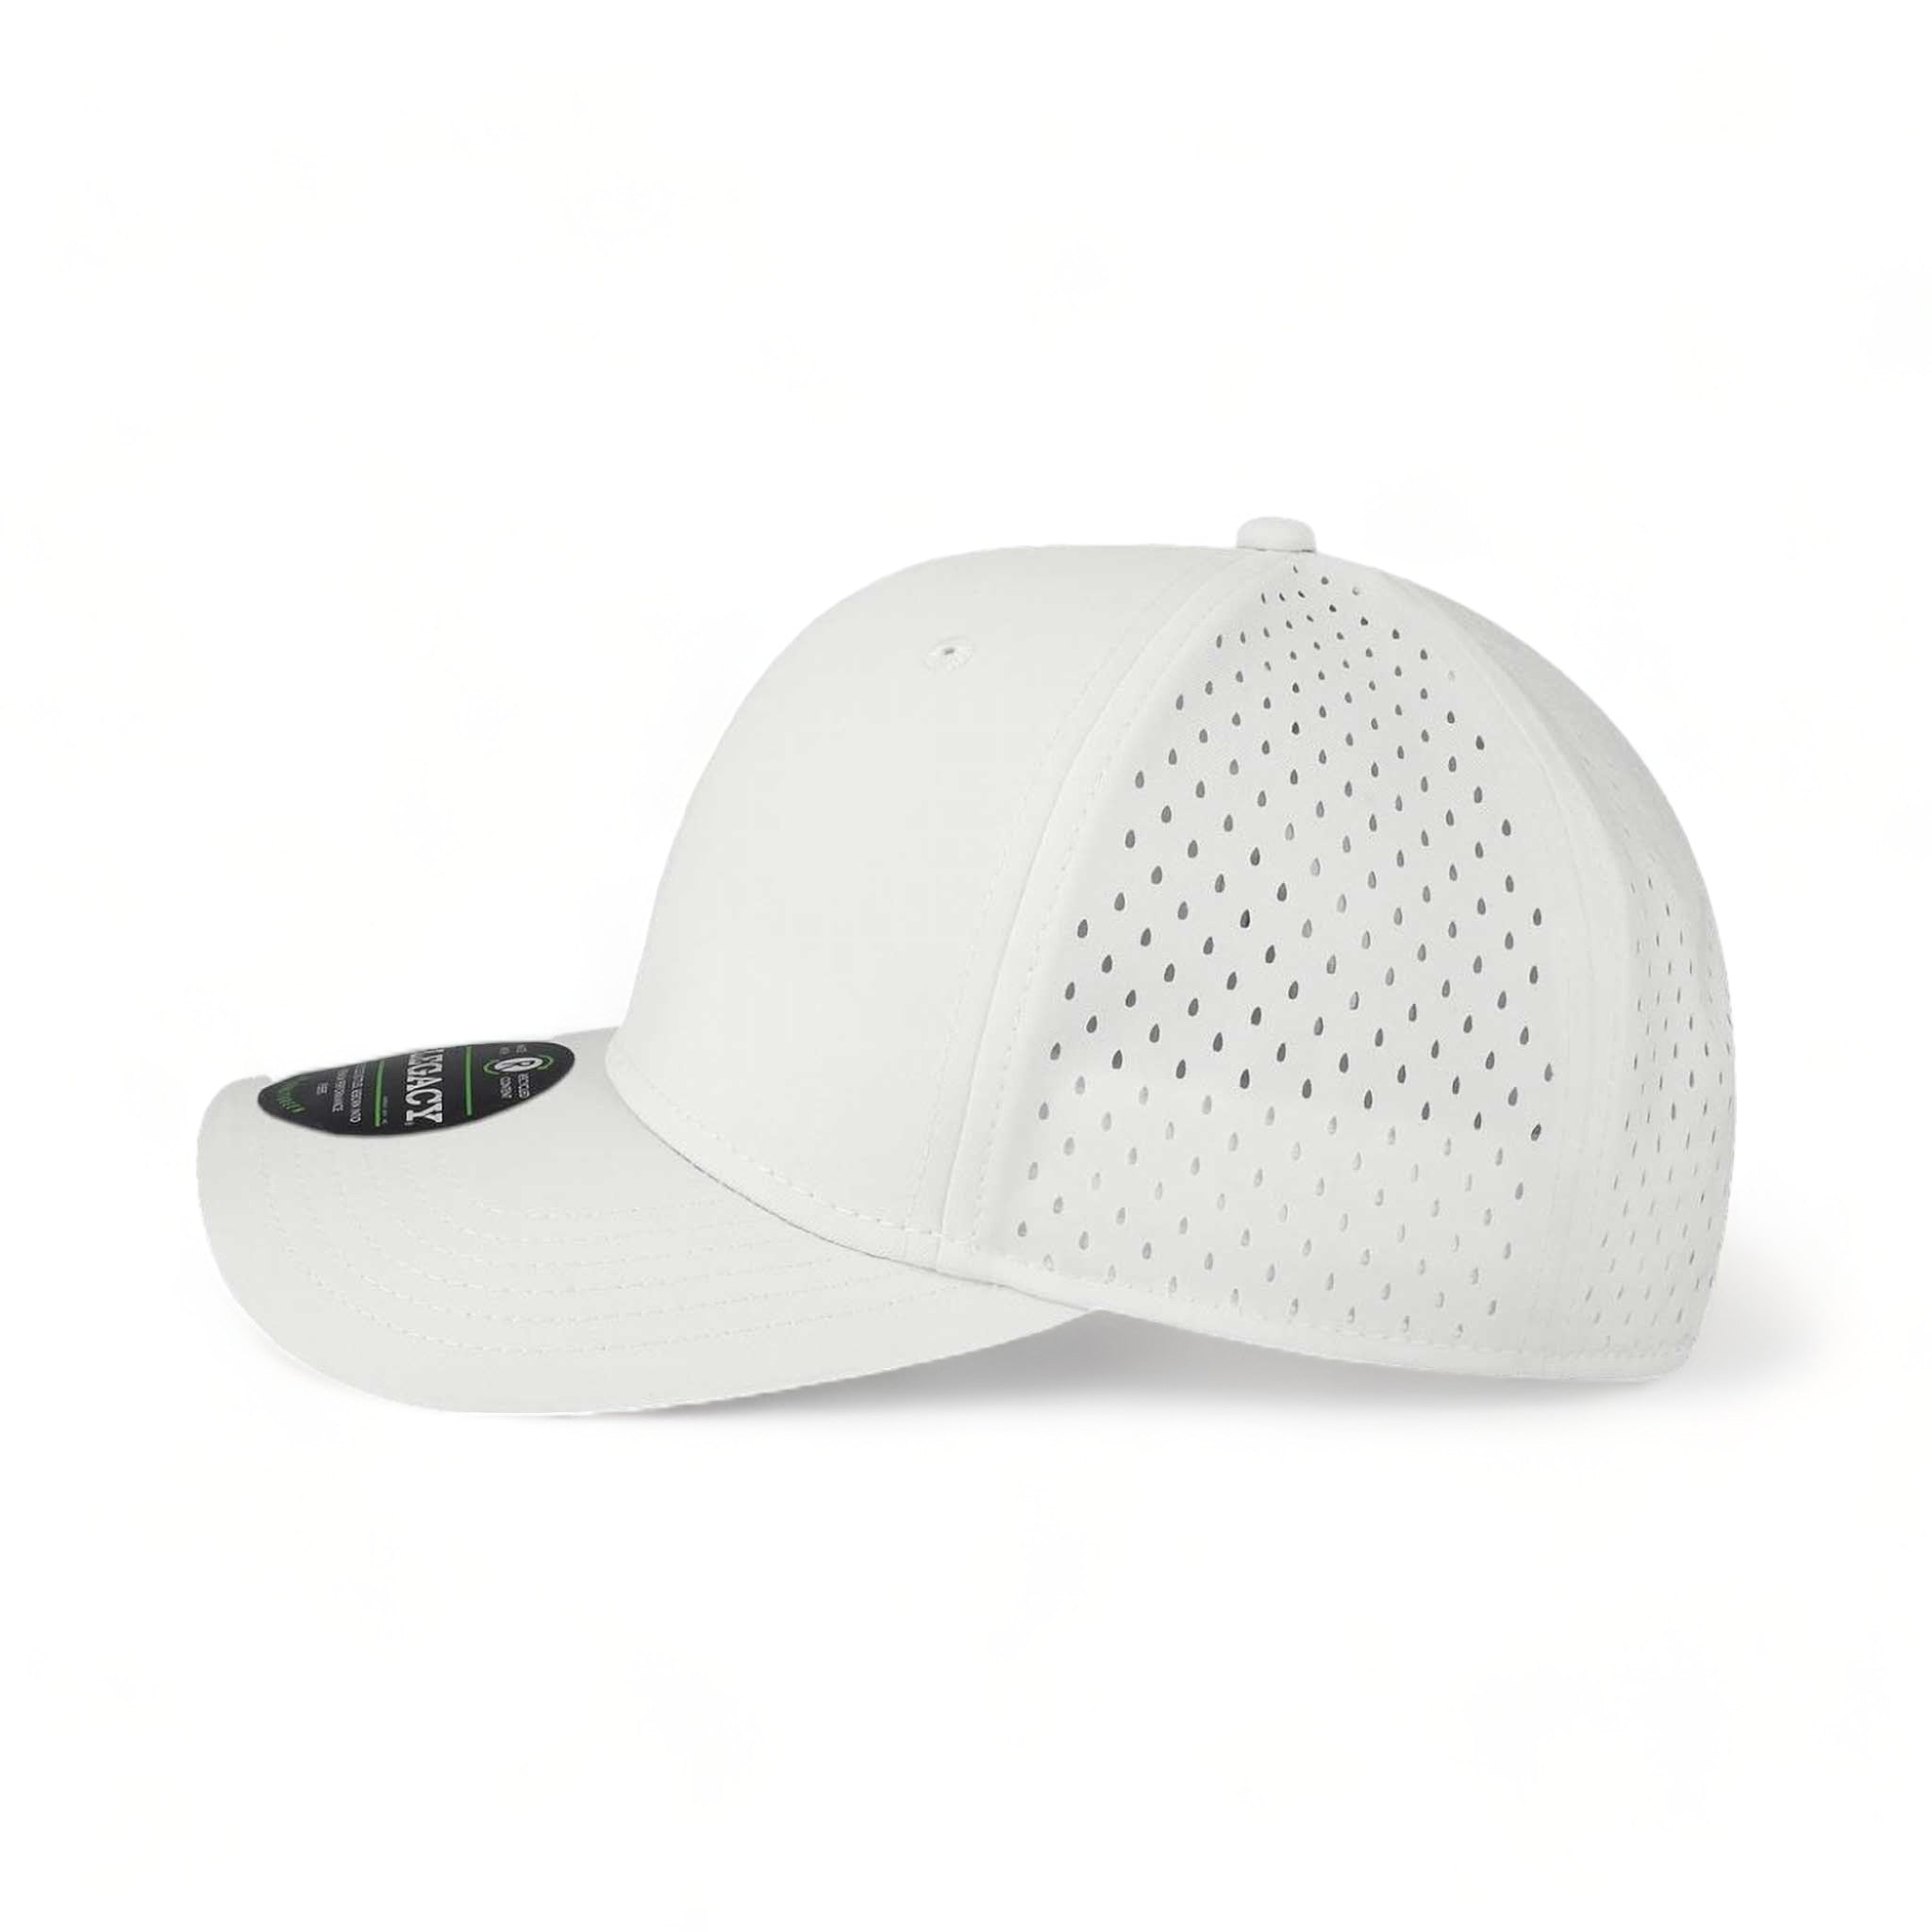 Side view of LEGACY REMPA custom hat in white